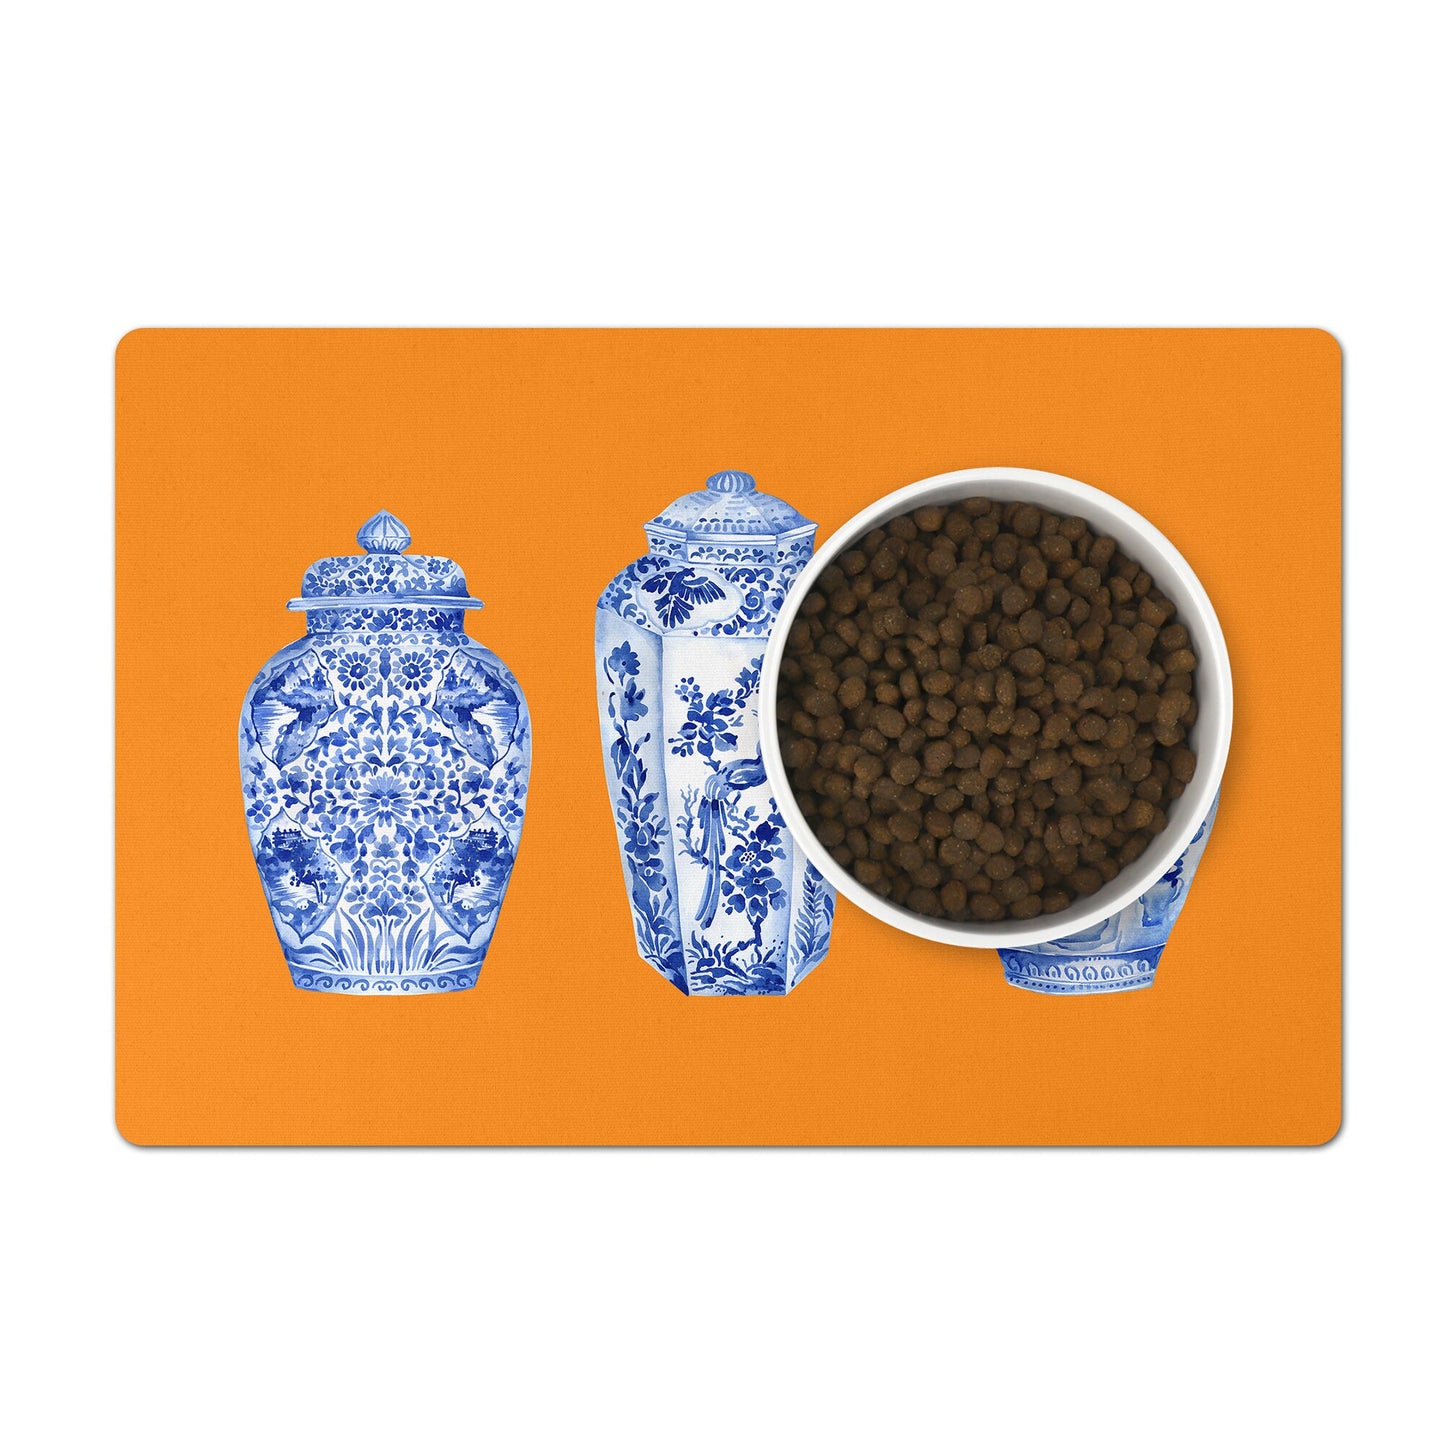 Orange pet food mat with blue and white ginger jars print for food and water bowls.